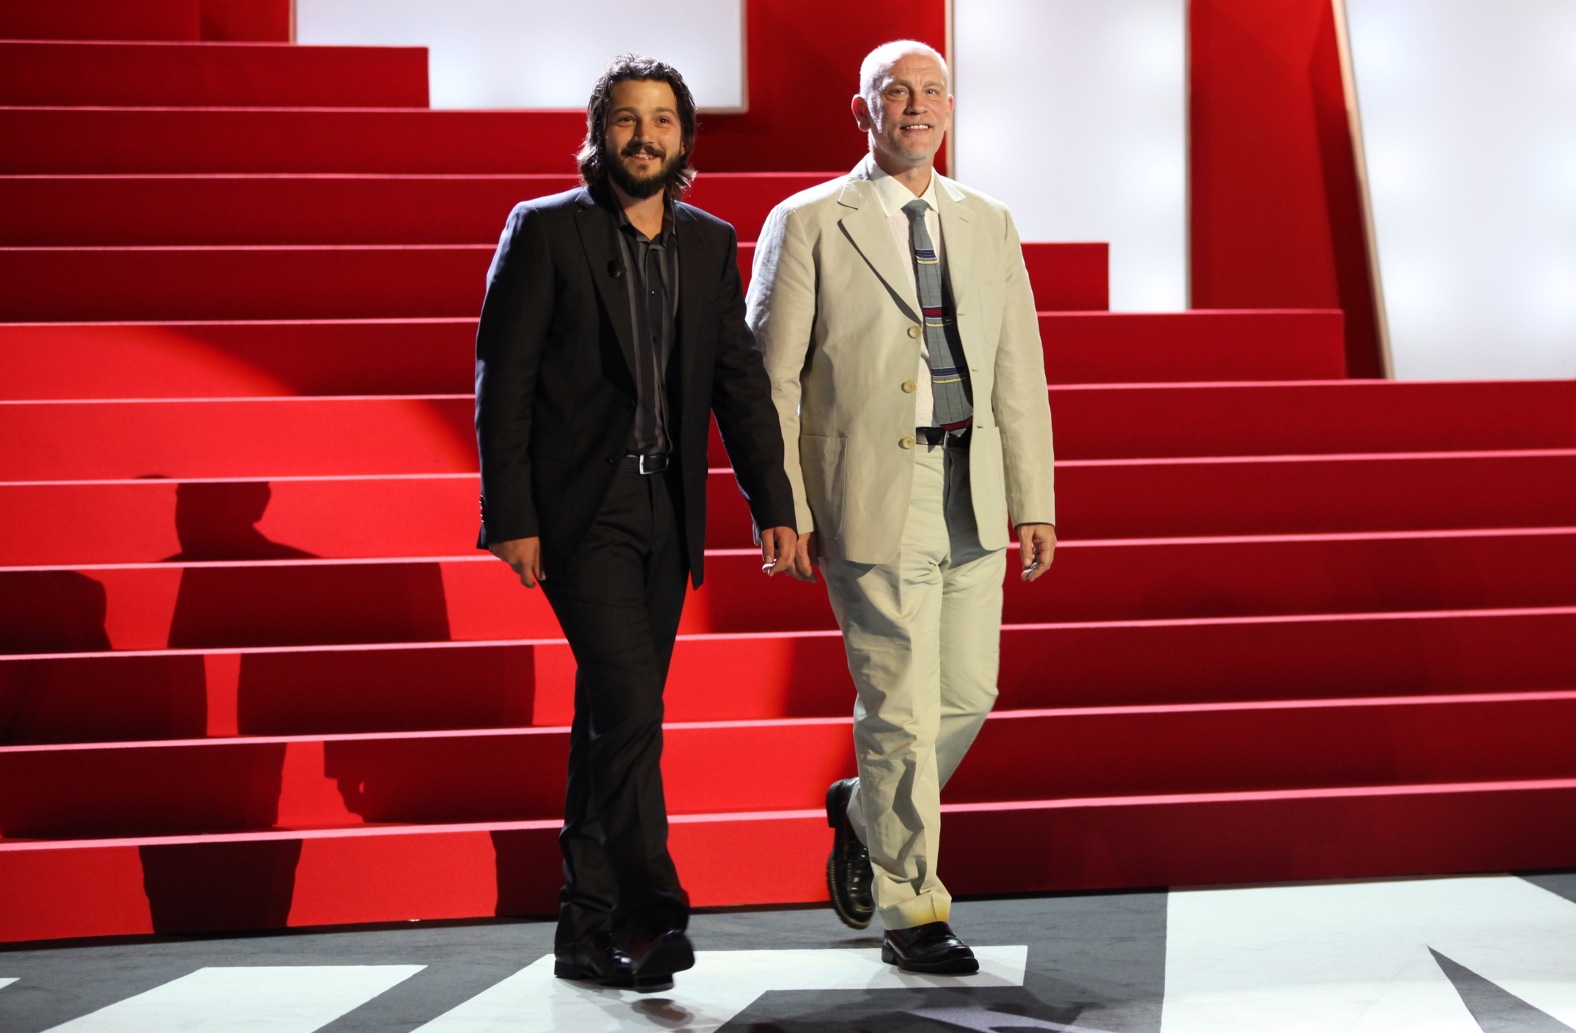 John Malkovich and Diego Luna to hit Mexico’s Broadway